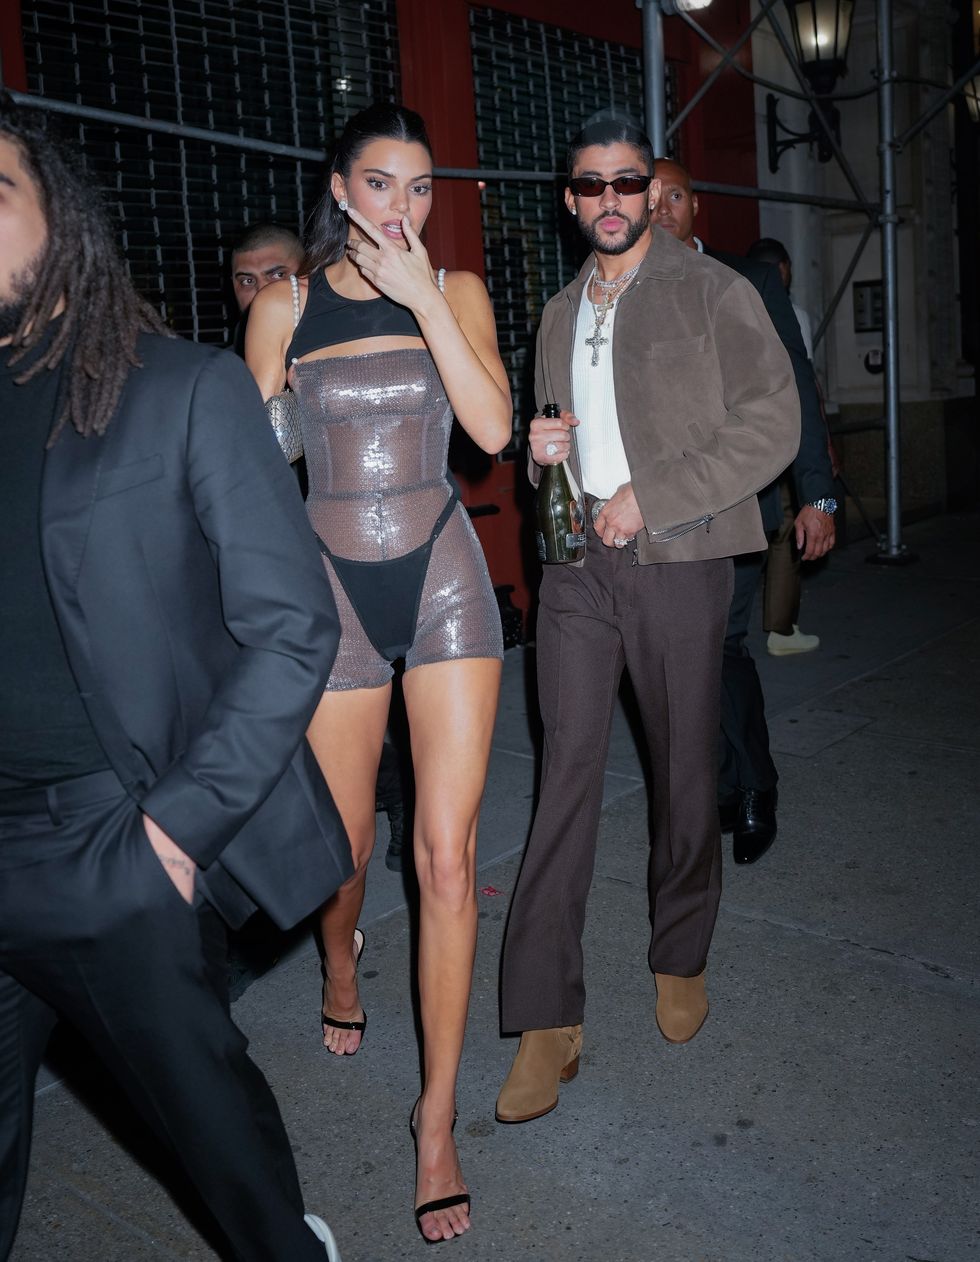 See Kendall Jenner and Bad Bunny Coordinate Their Looks In First Public Date